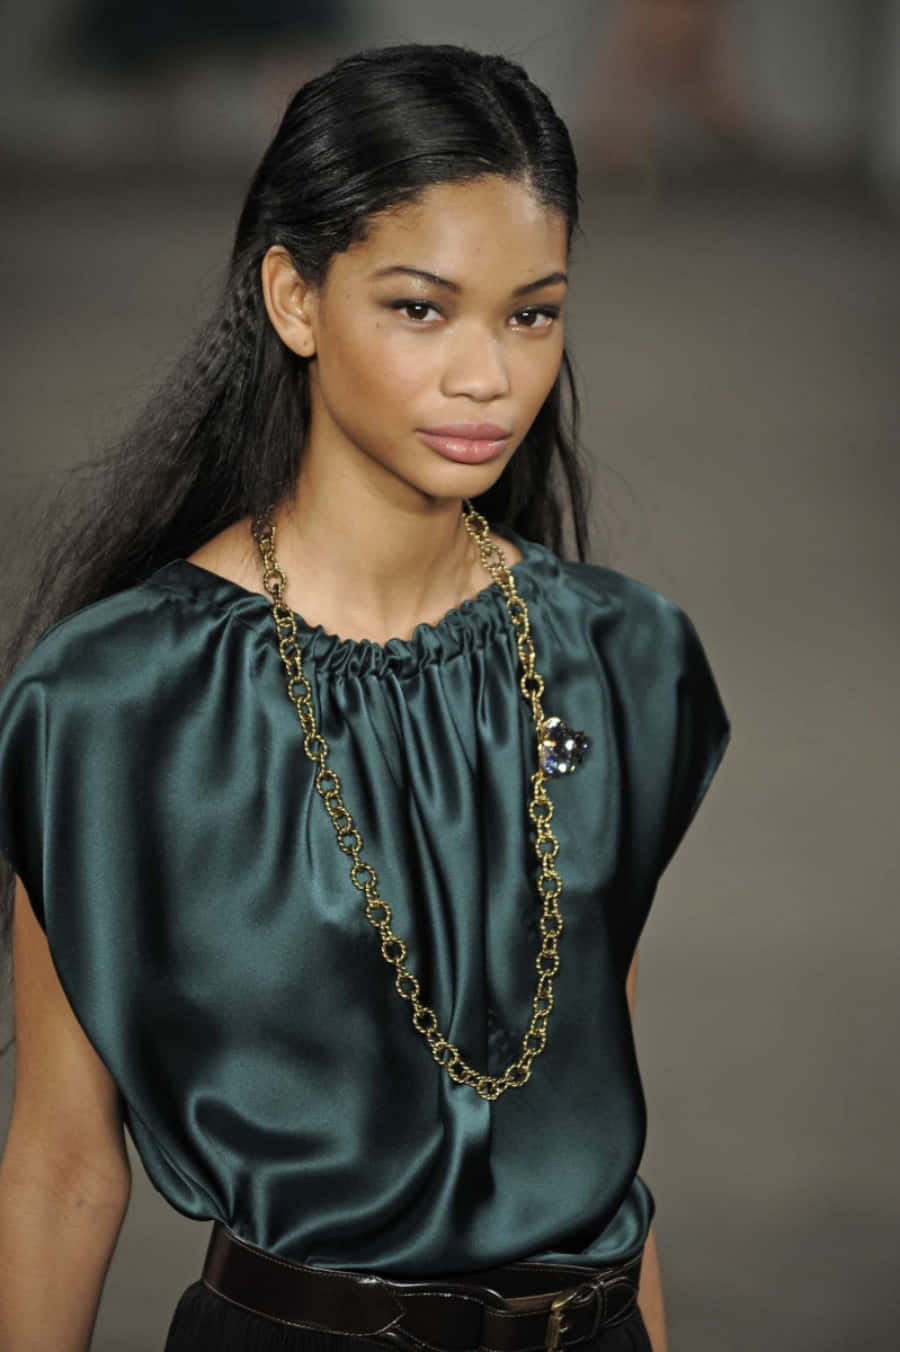 Chanel Iman In A Striking Pose On The Catwalk Wallpaper